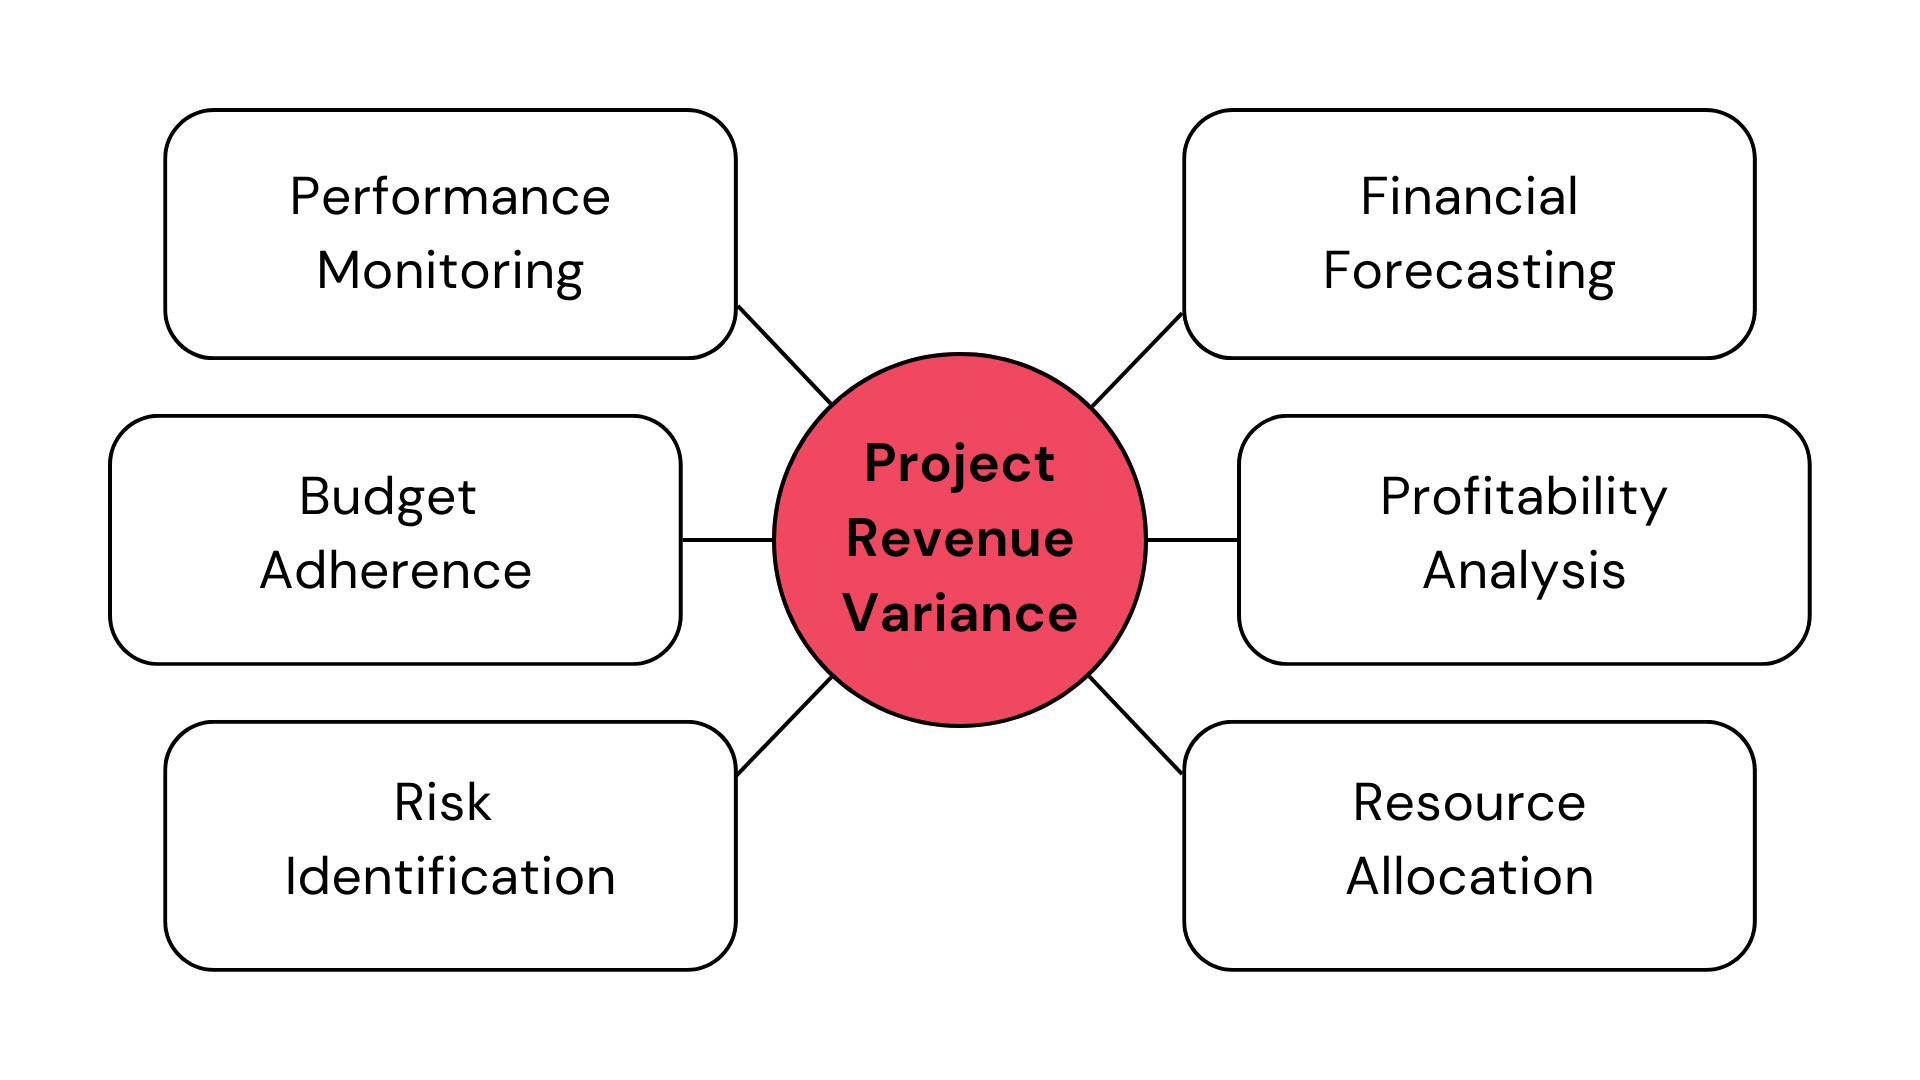 Project revenue variance